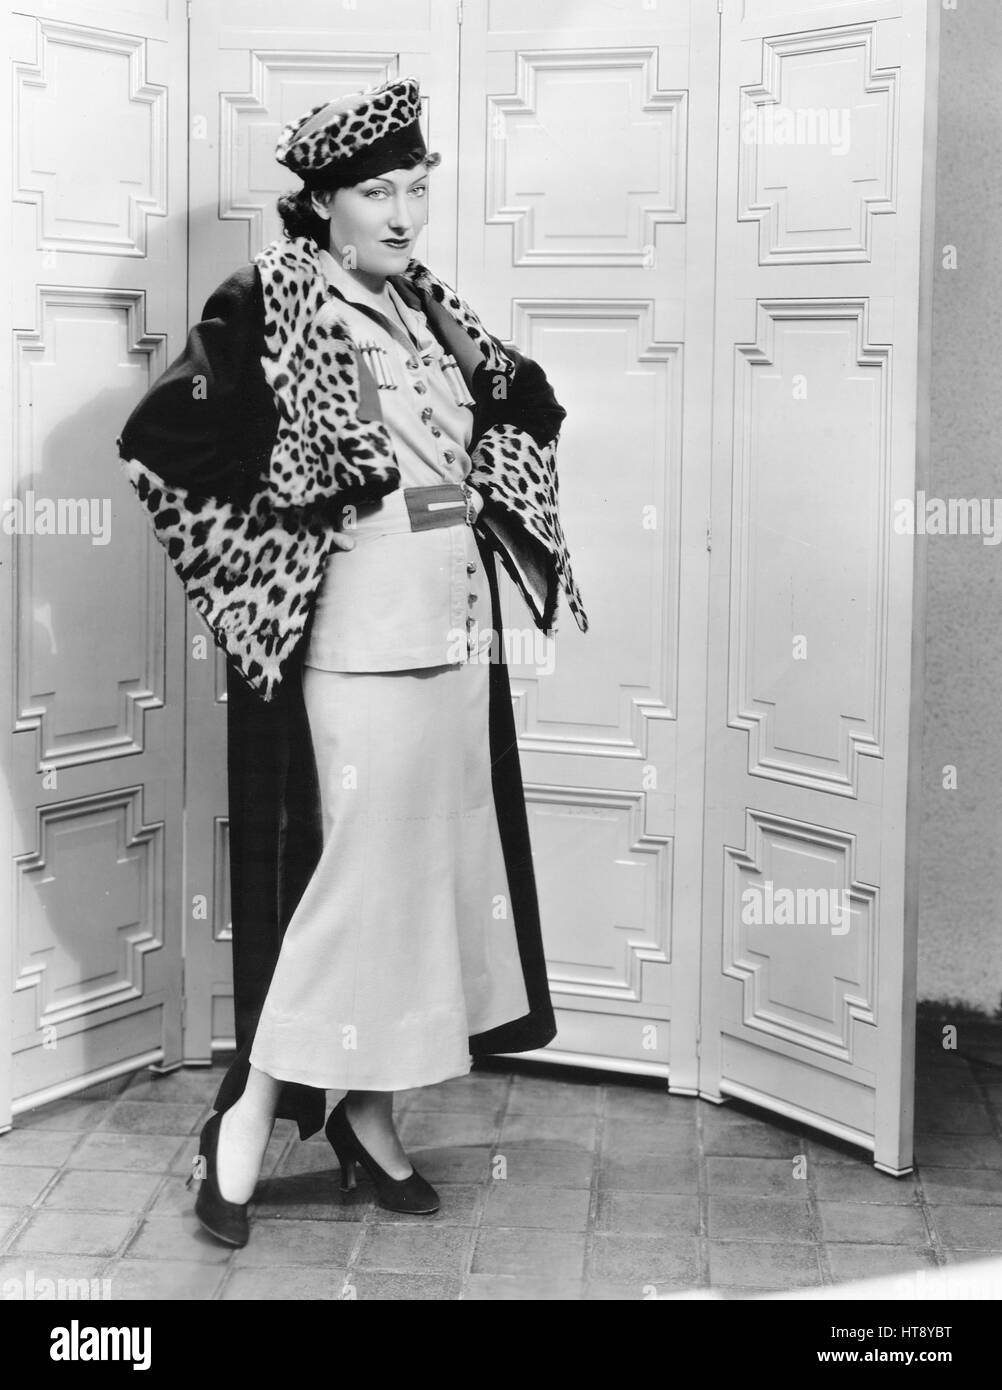 'Strictly Russian is this new ensemble worn by Gloria Swanson, charming Metro-Goldwyn-Mayer star. The dress is of gold woolen trimmed with cartridge pleating and red banding. The sleeves are full, caught in at the wrist by tight cuffs. The coat is of brown woolen lined with the gold. There is a red border around the lining. Leopard skin trims the collar and sleeves. The hat is a cossack type of leopard and matching material.' Stock Photo